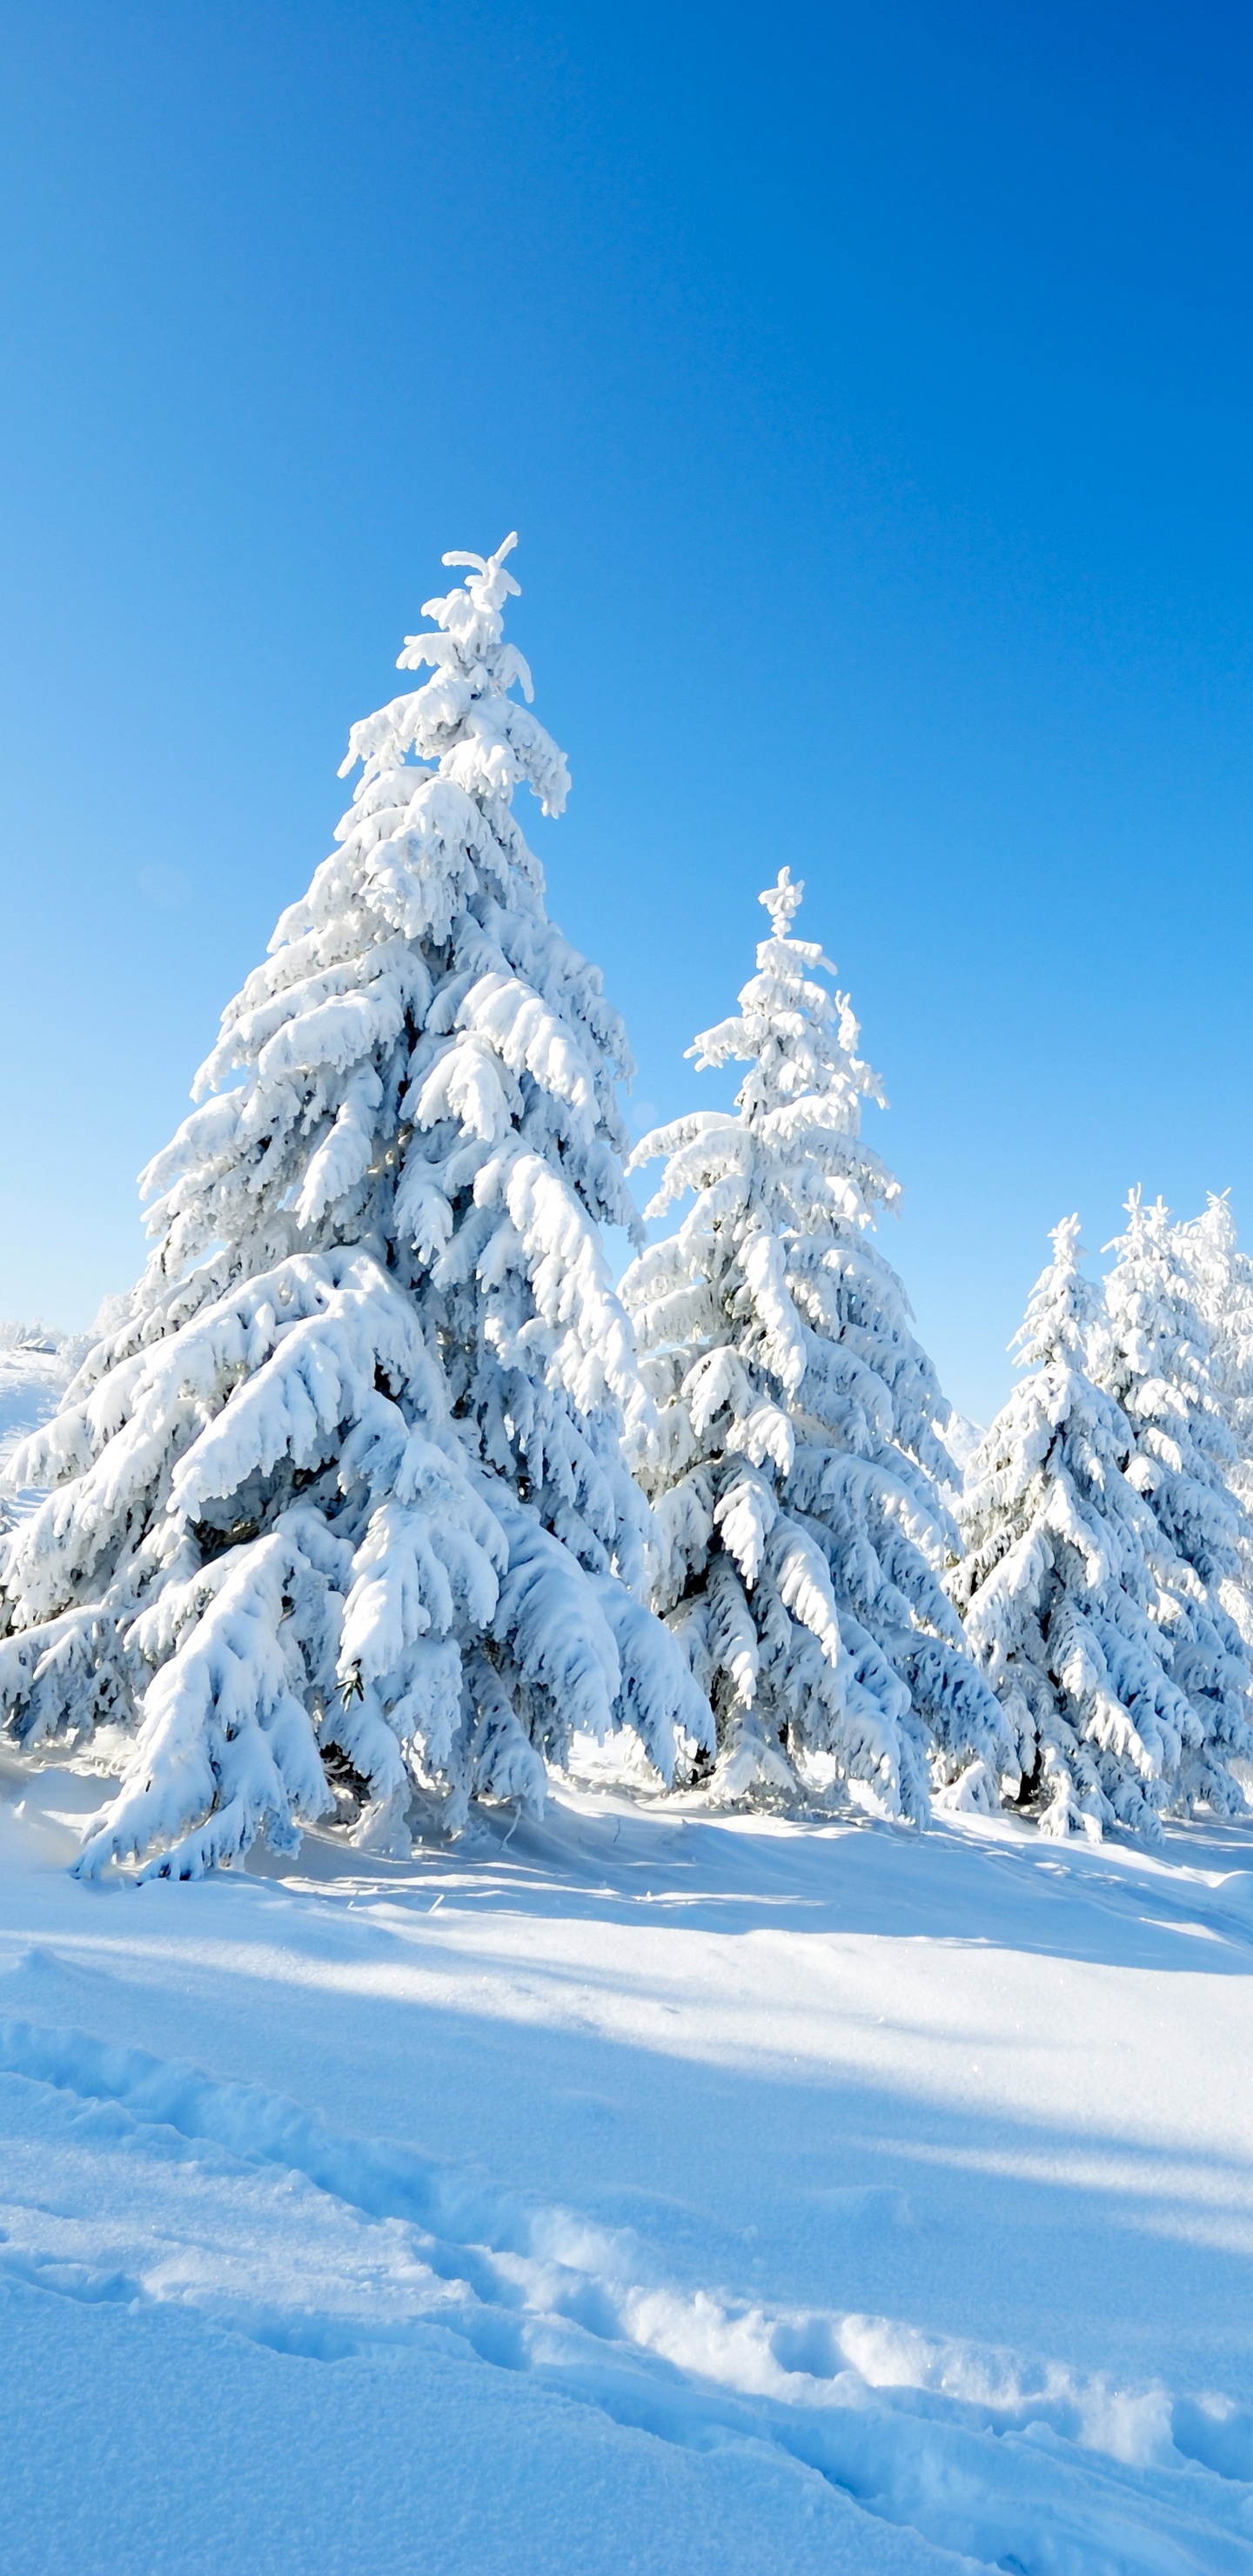 Snow Covered Pine Trees on Snow Covered Ground Under Blue Sky During Daytime. Wallpaper in 1440x2960 Resolution